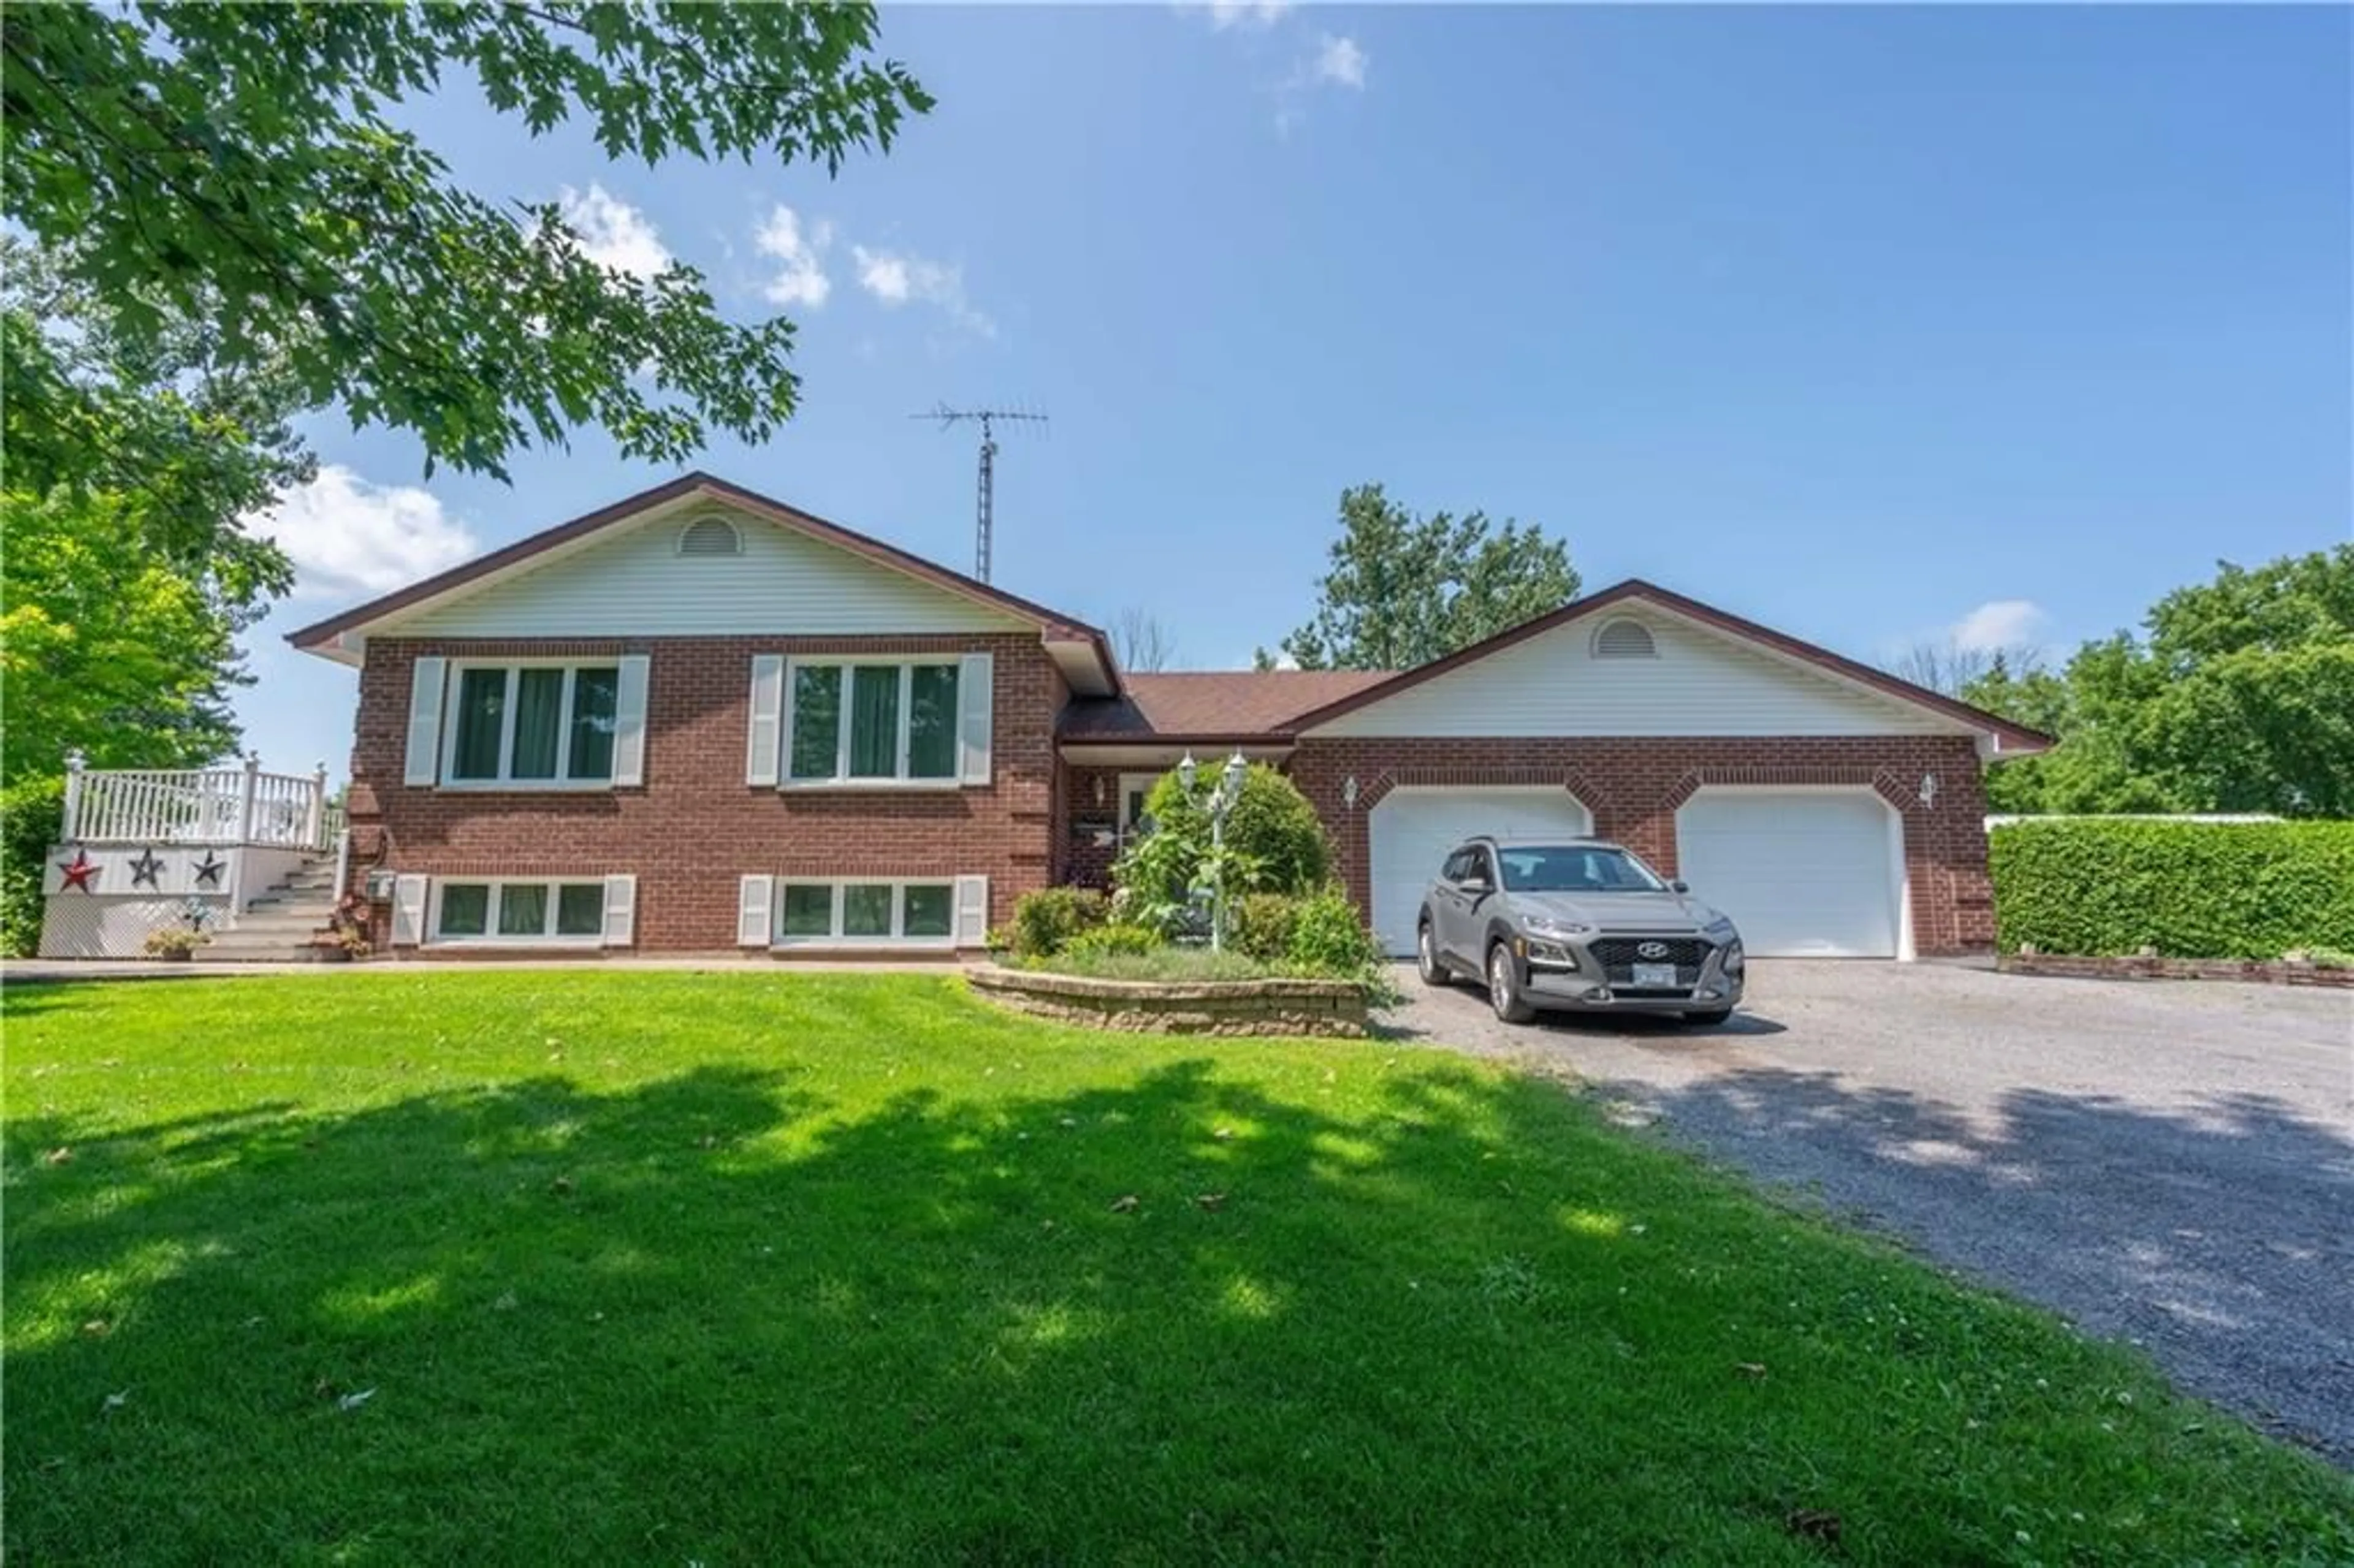 Frontside or backside of a home for 13277 FROATS Rd, Chesterville Ontario K0C 1H0